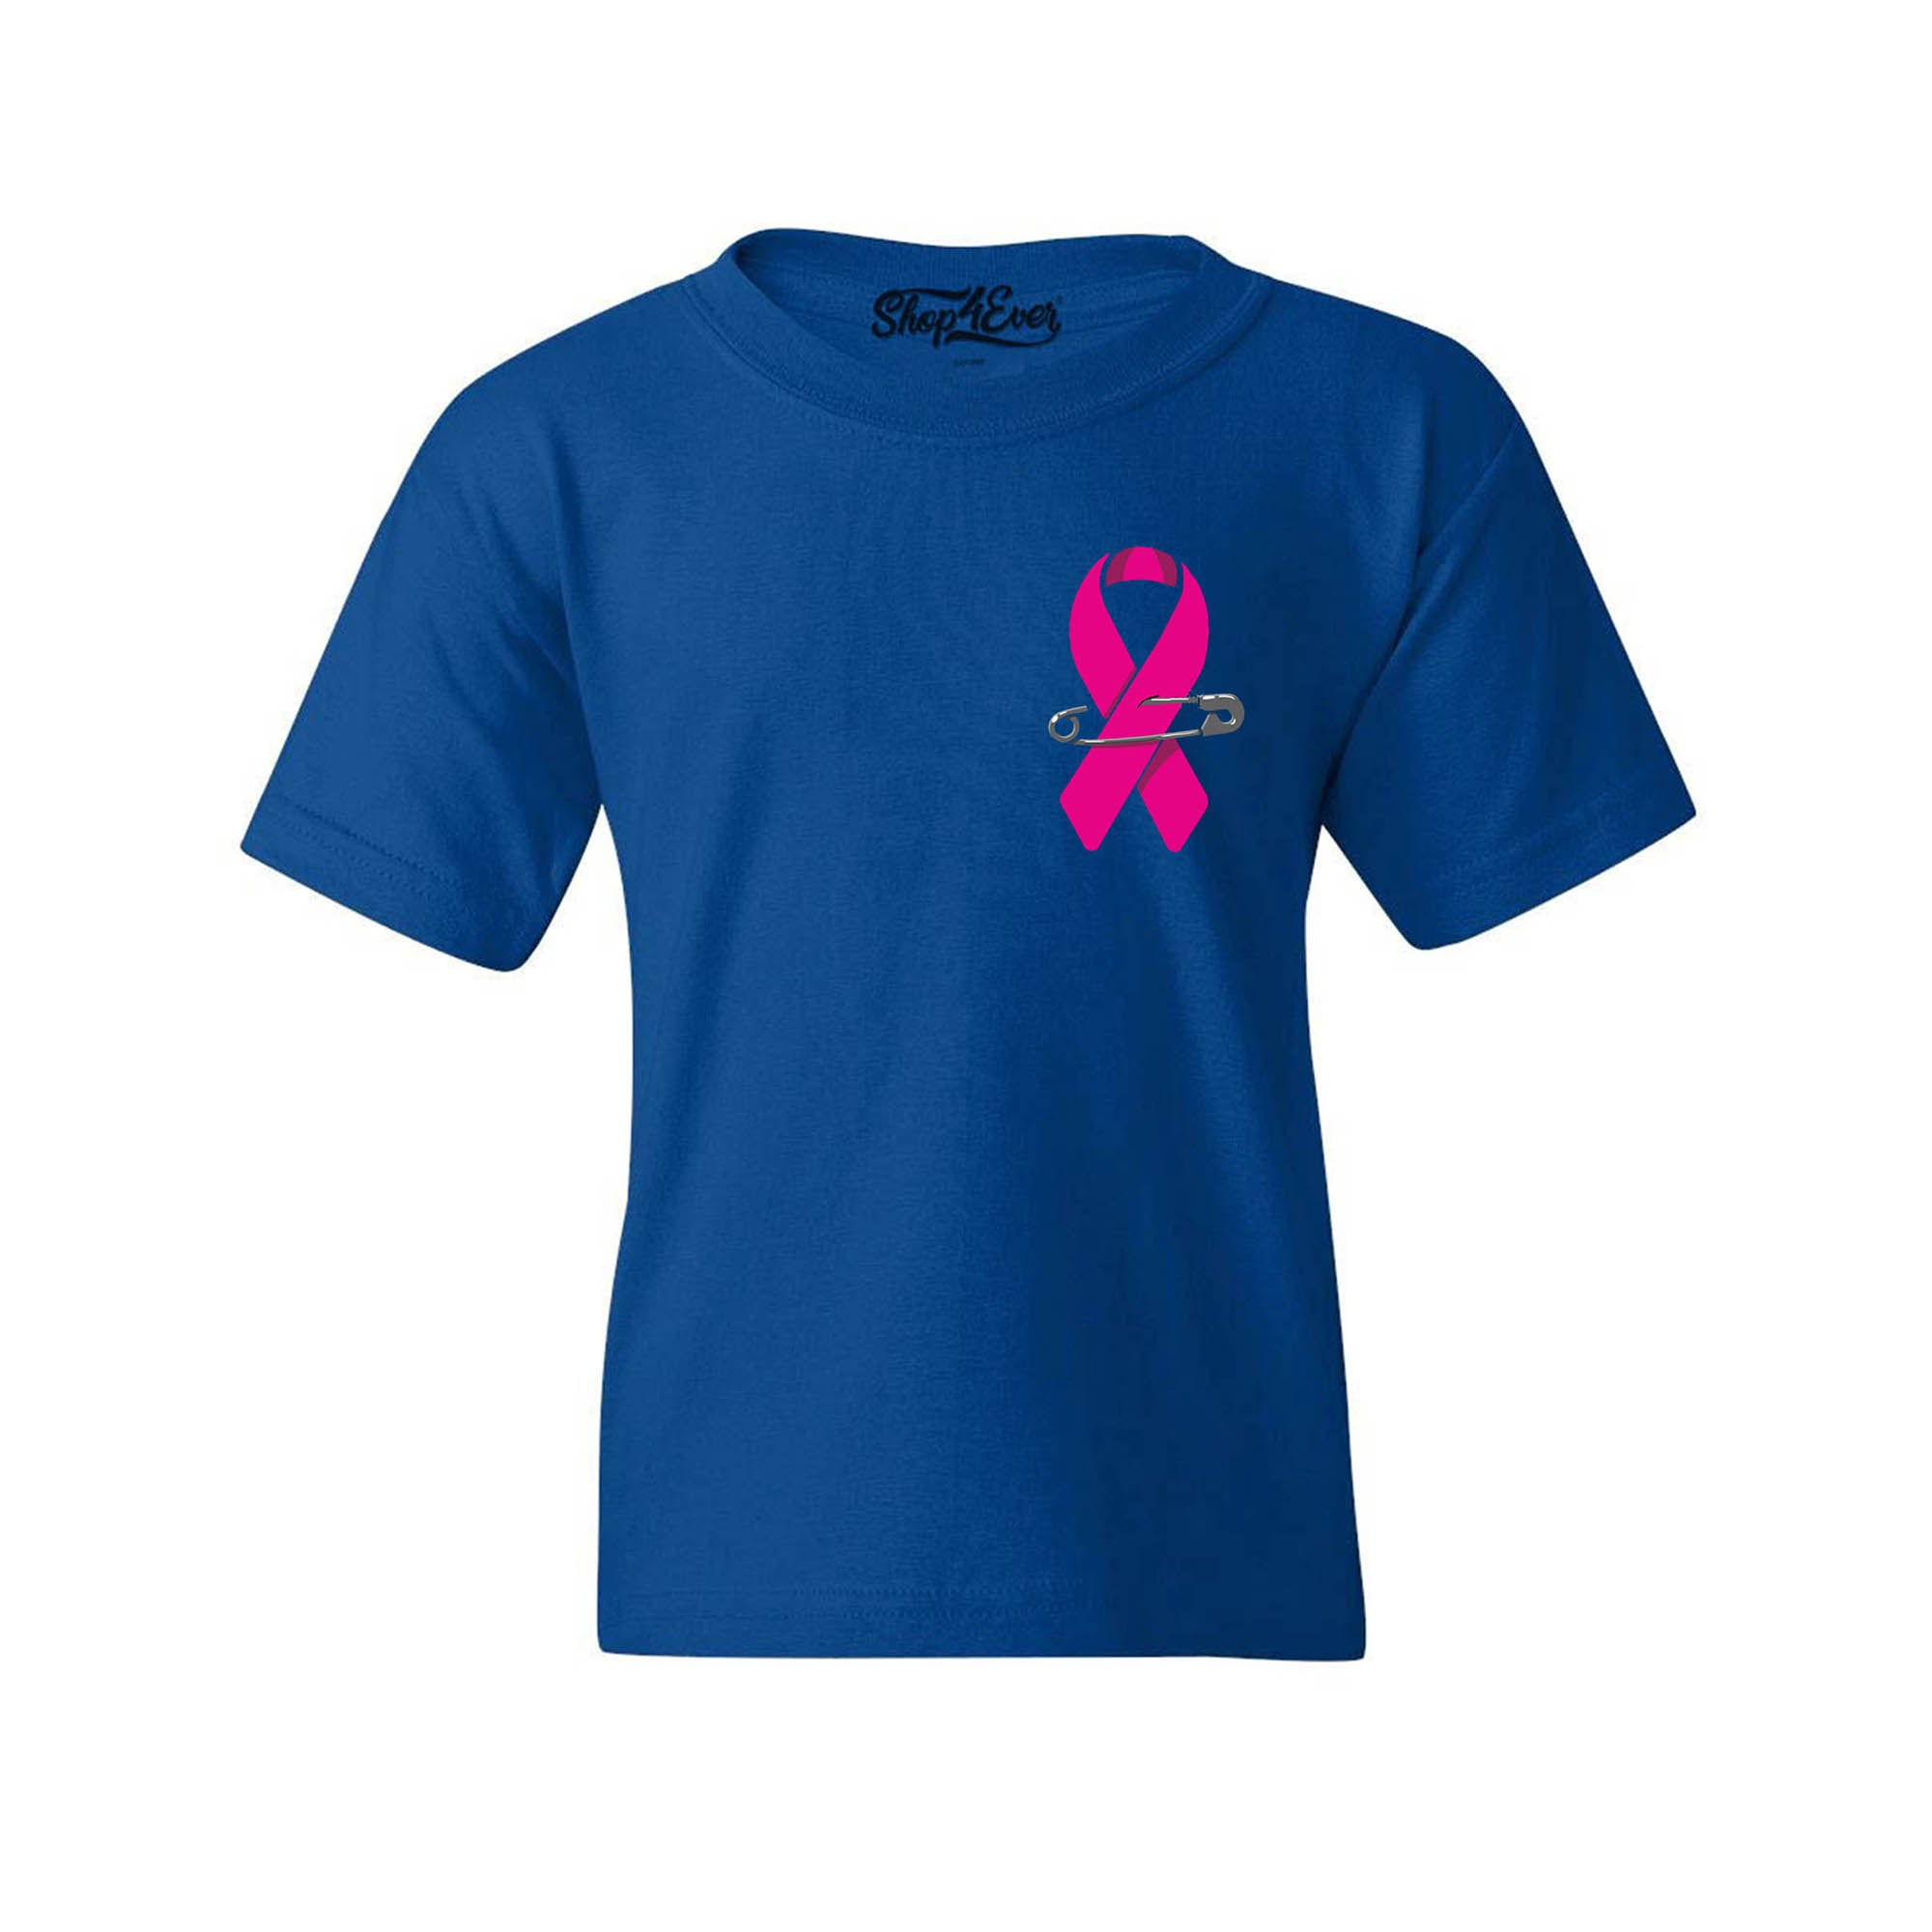 Pink Breast Cancer Ribbon Pin Youth's T-Shirt Support Awareness Child's Tee